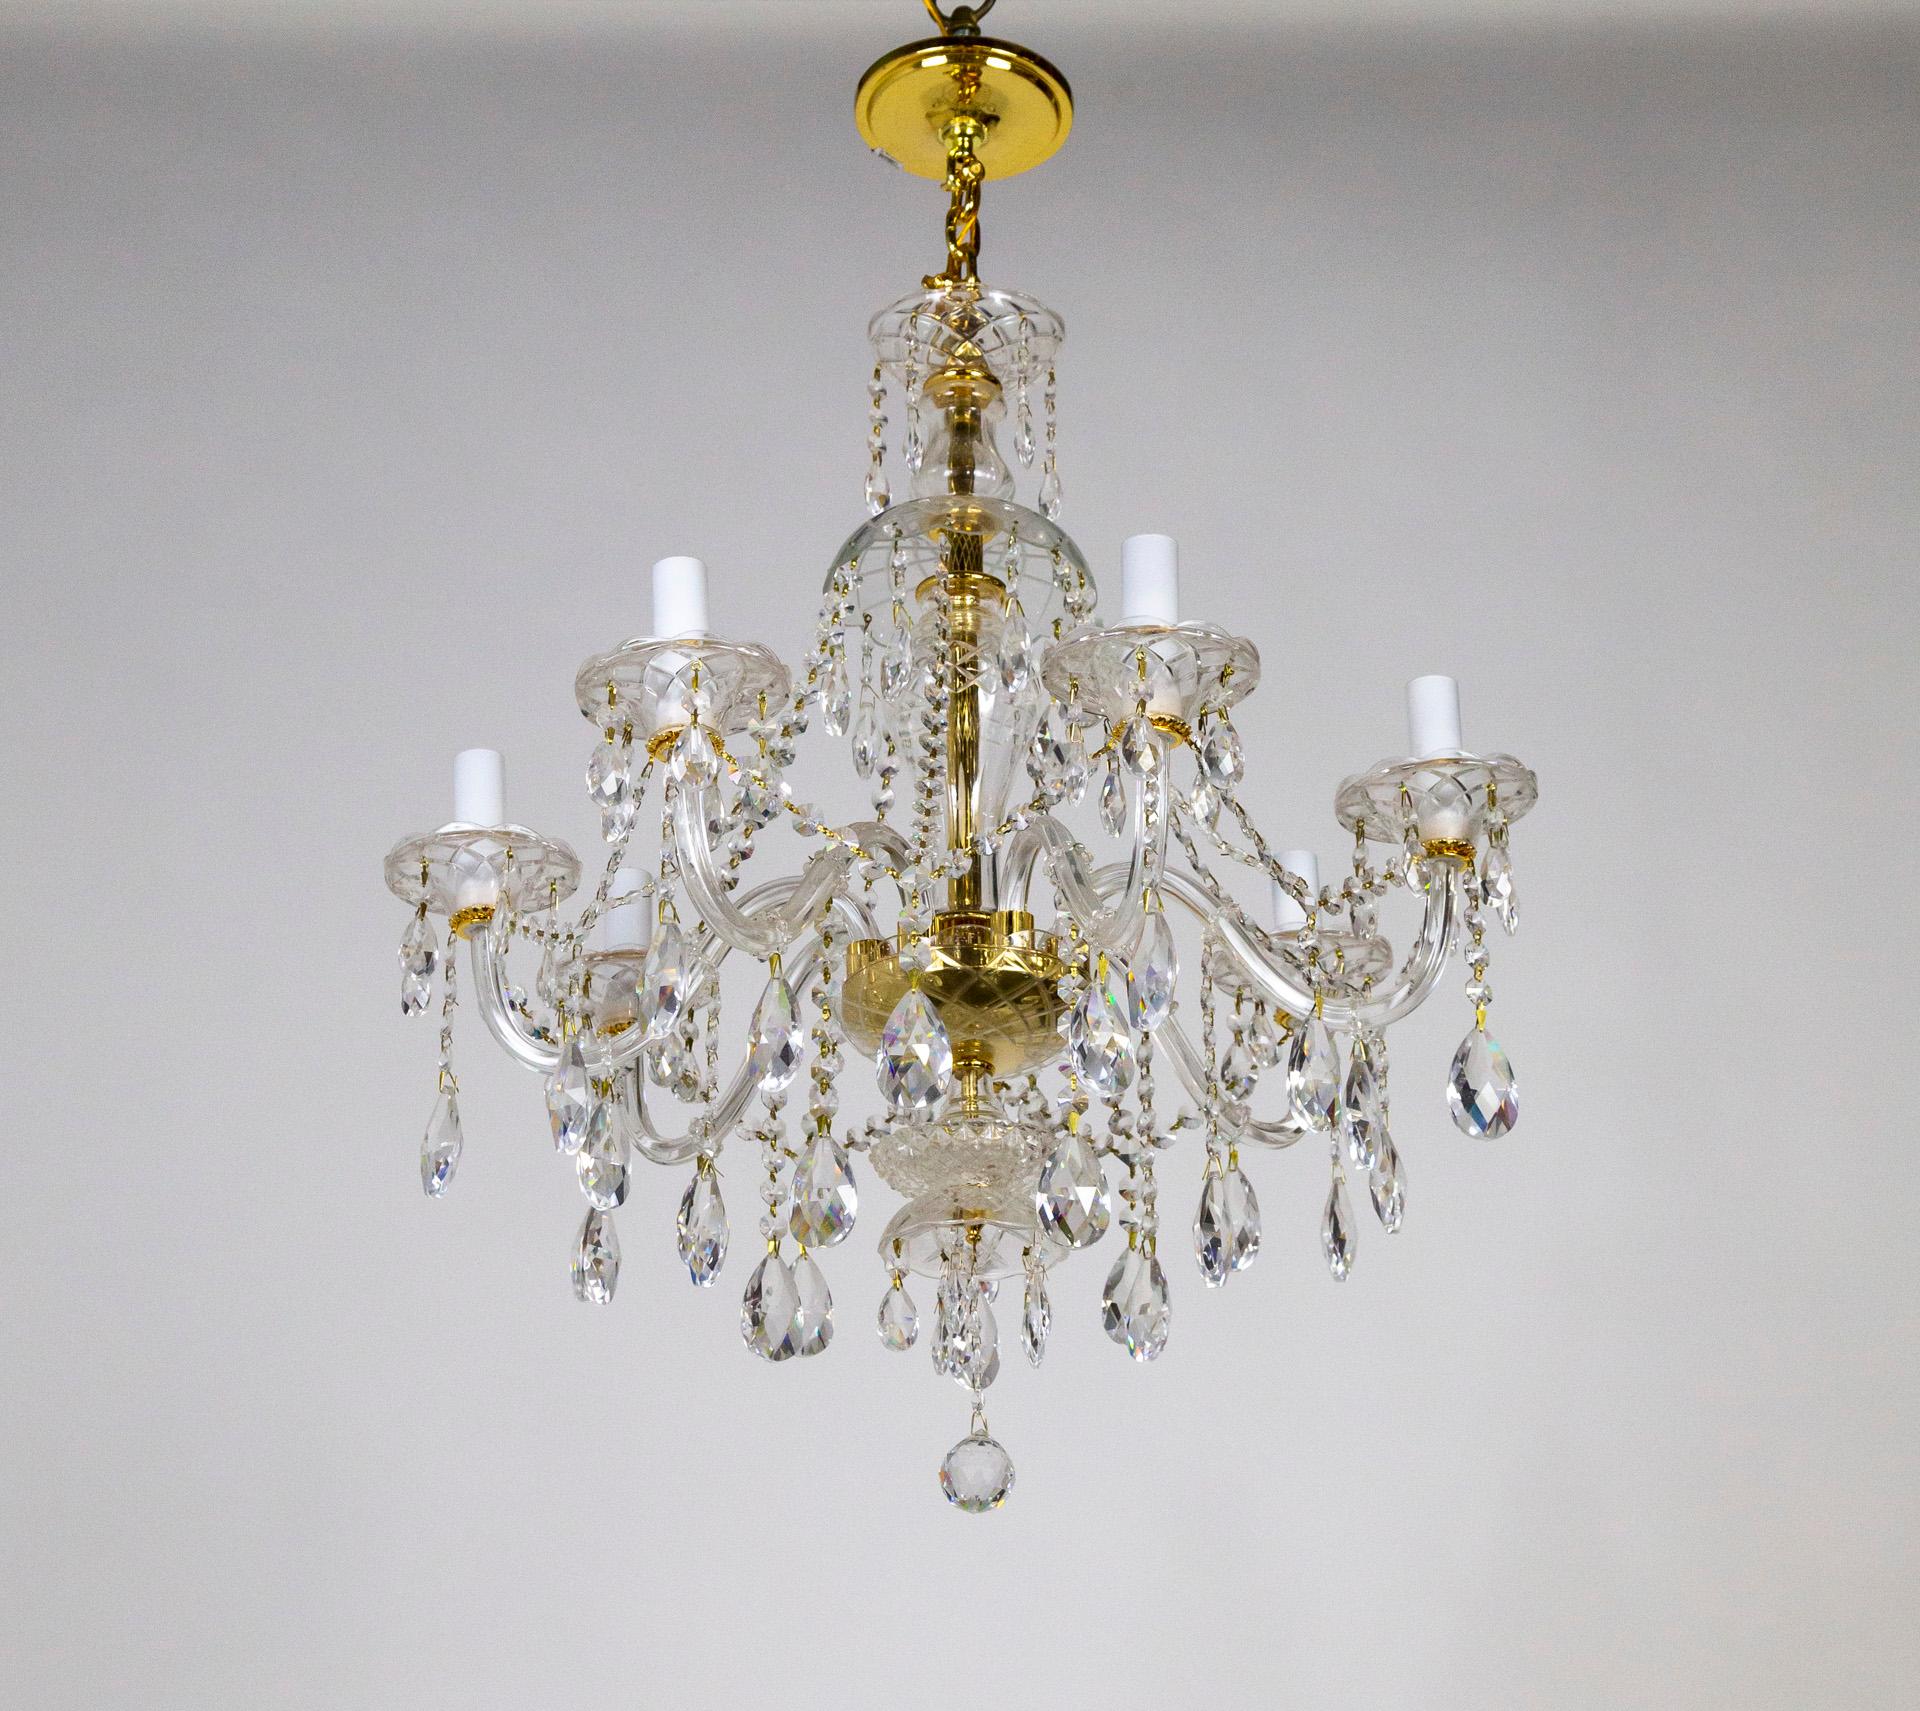 A 7-light chandelier made of Bohemian molded glass and dangling, sharply-cut, almond crystals. With crystal-beaded garlands and a gold-toned stem and accents. circa 1970s. Measures: 33.5